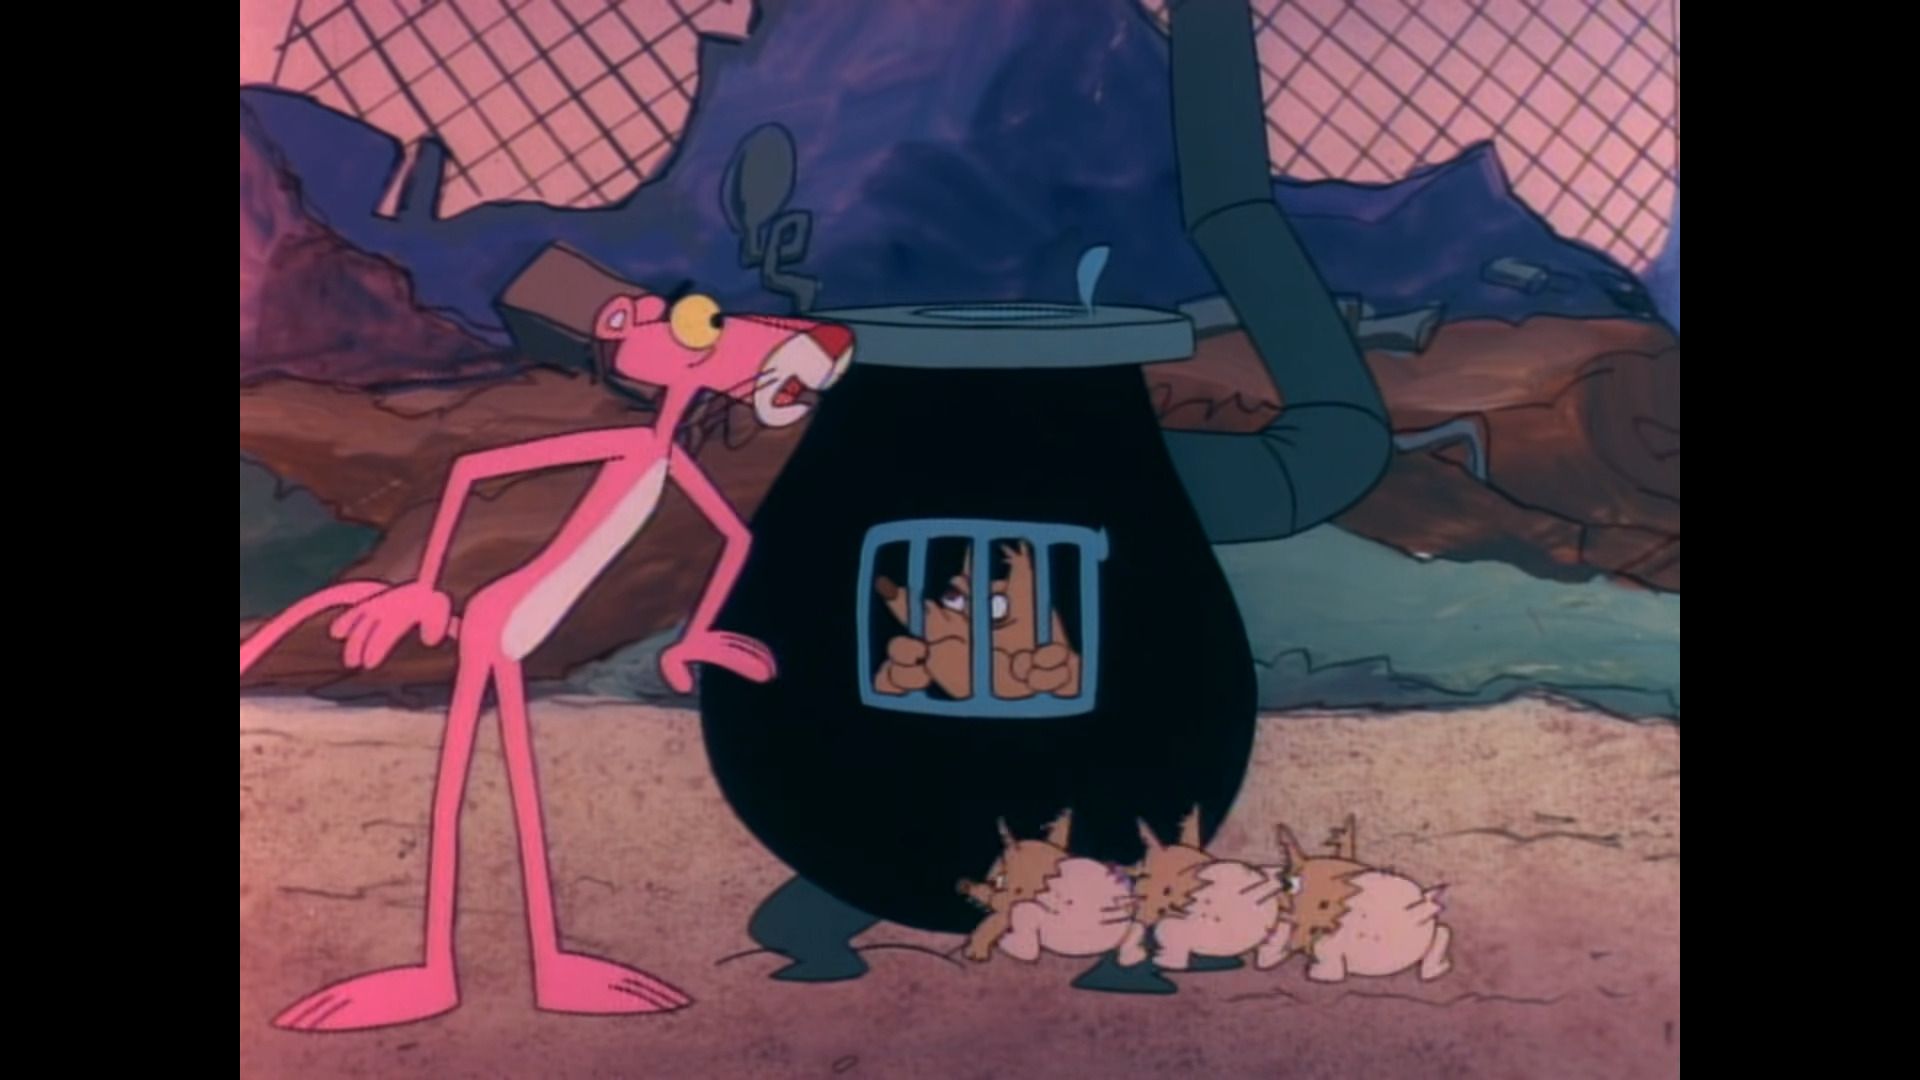 The Pink Panther background